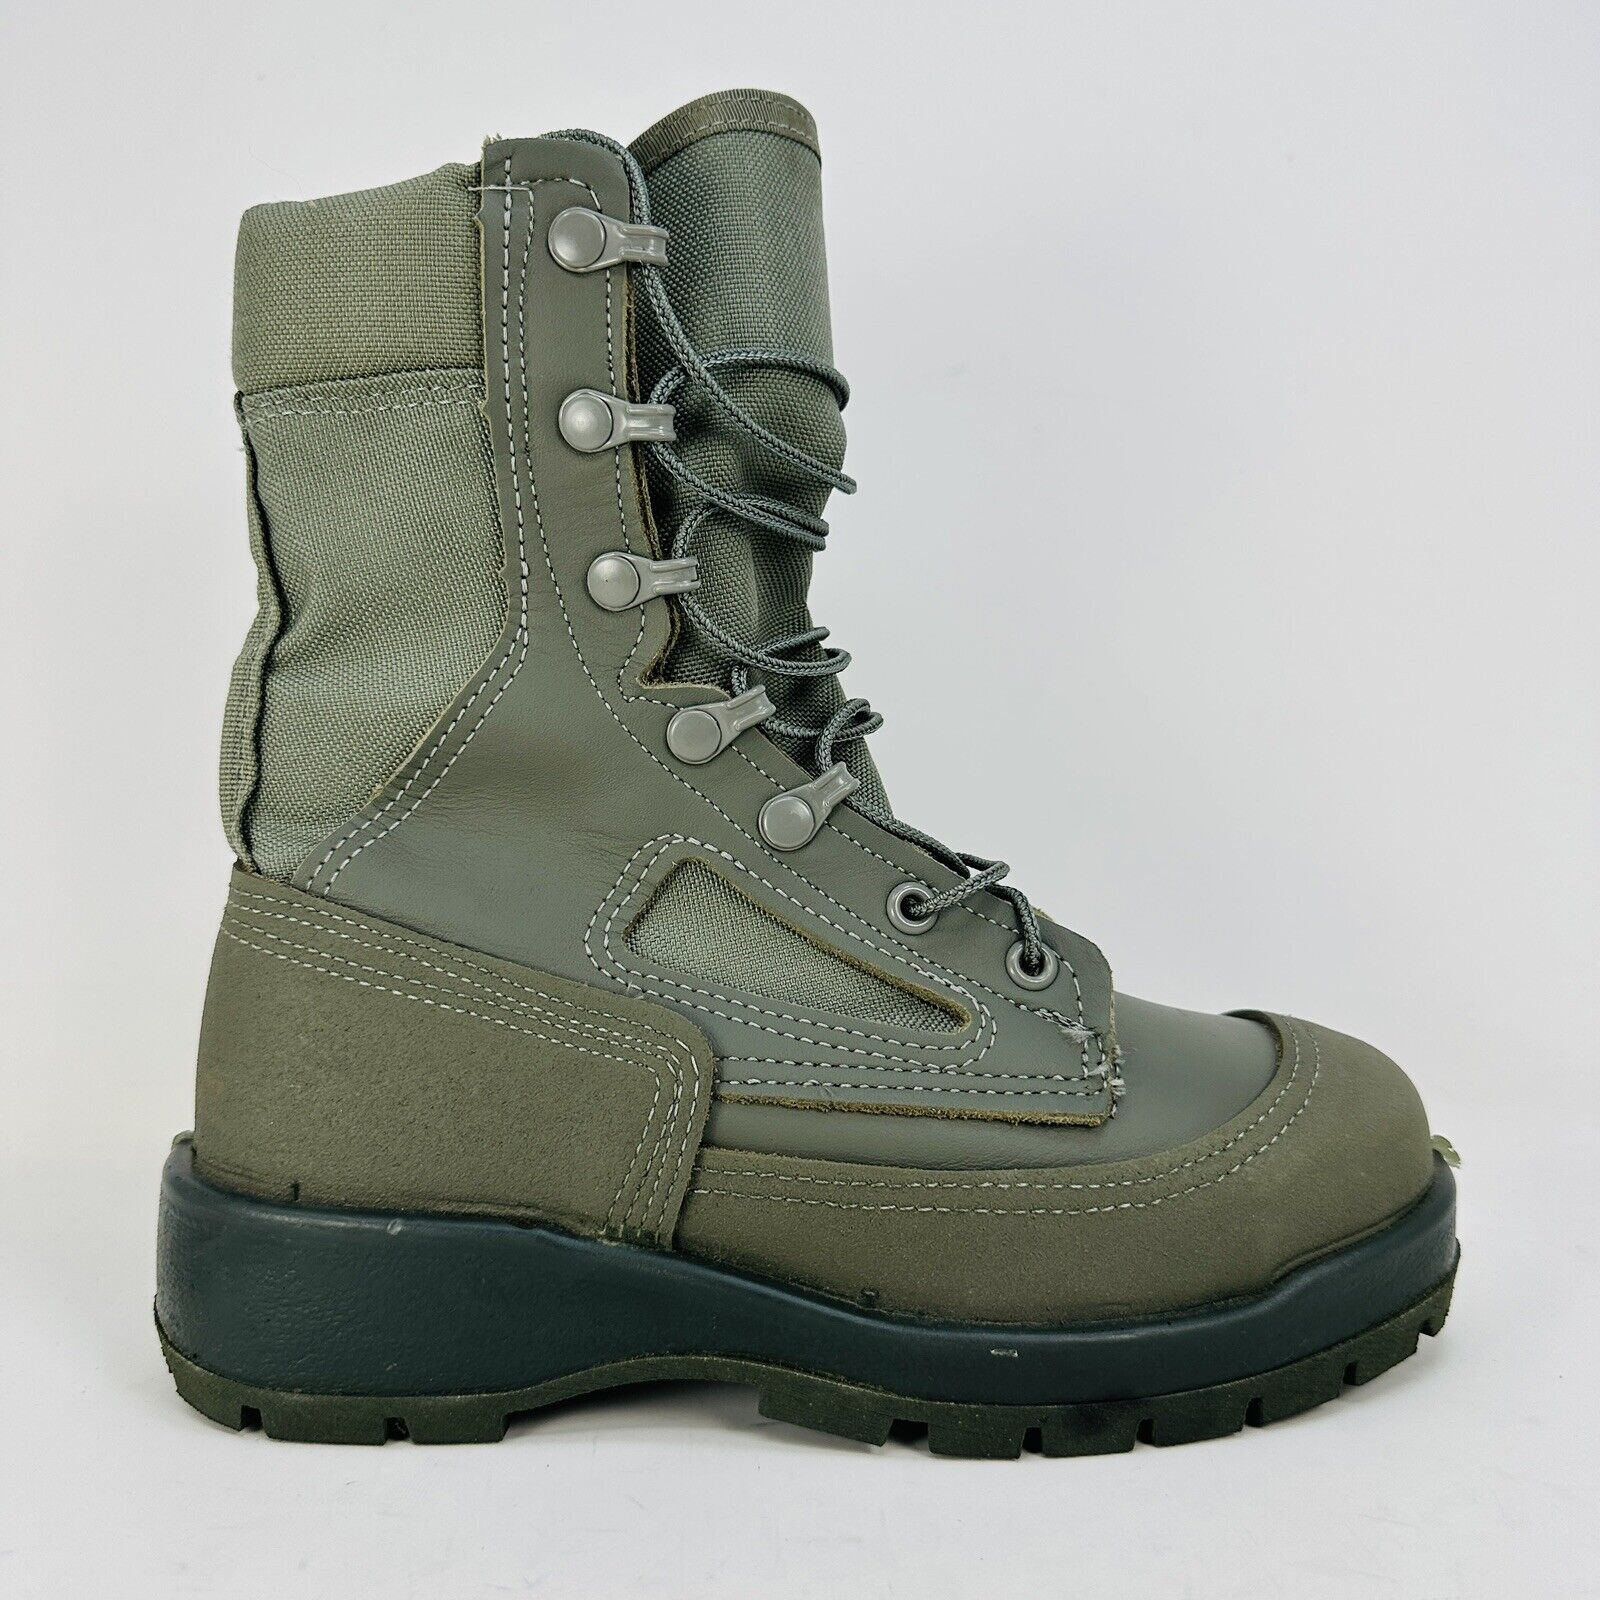 Belleville Boots Women's Size 4.5 R F630 ST Hot Weather USAF Military